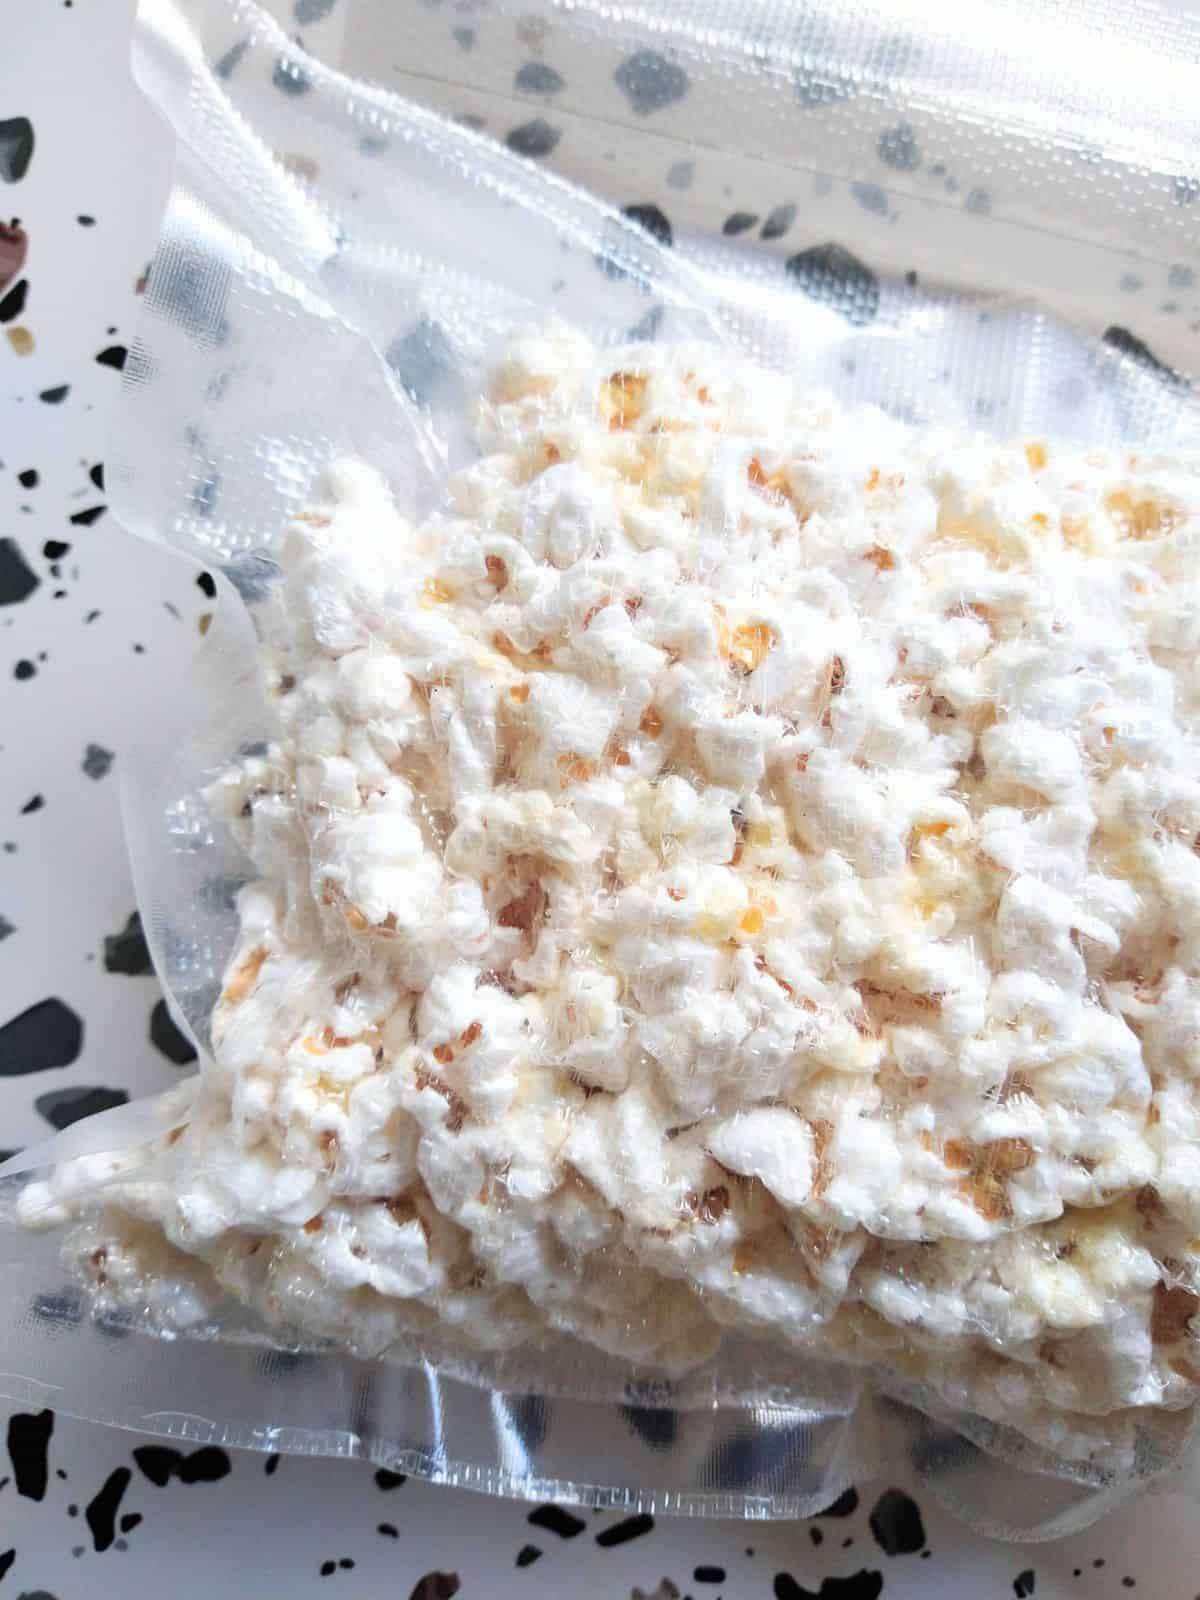 Fresh popcorn is vacuum sealed in a plastic bag, sitting on a table that is white with gray and brown spots.